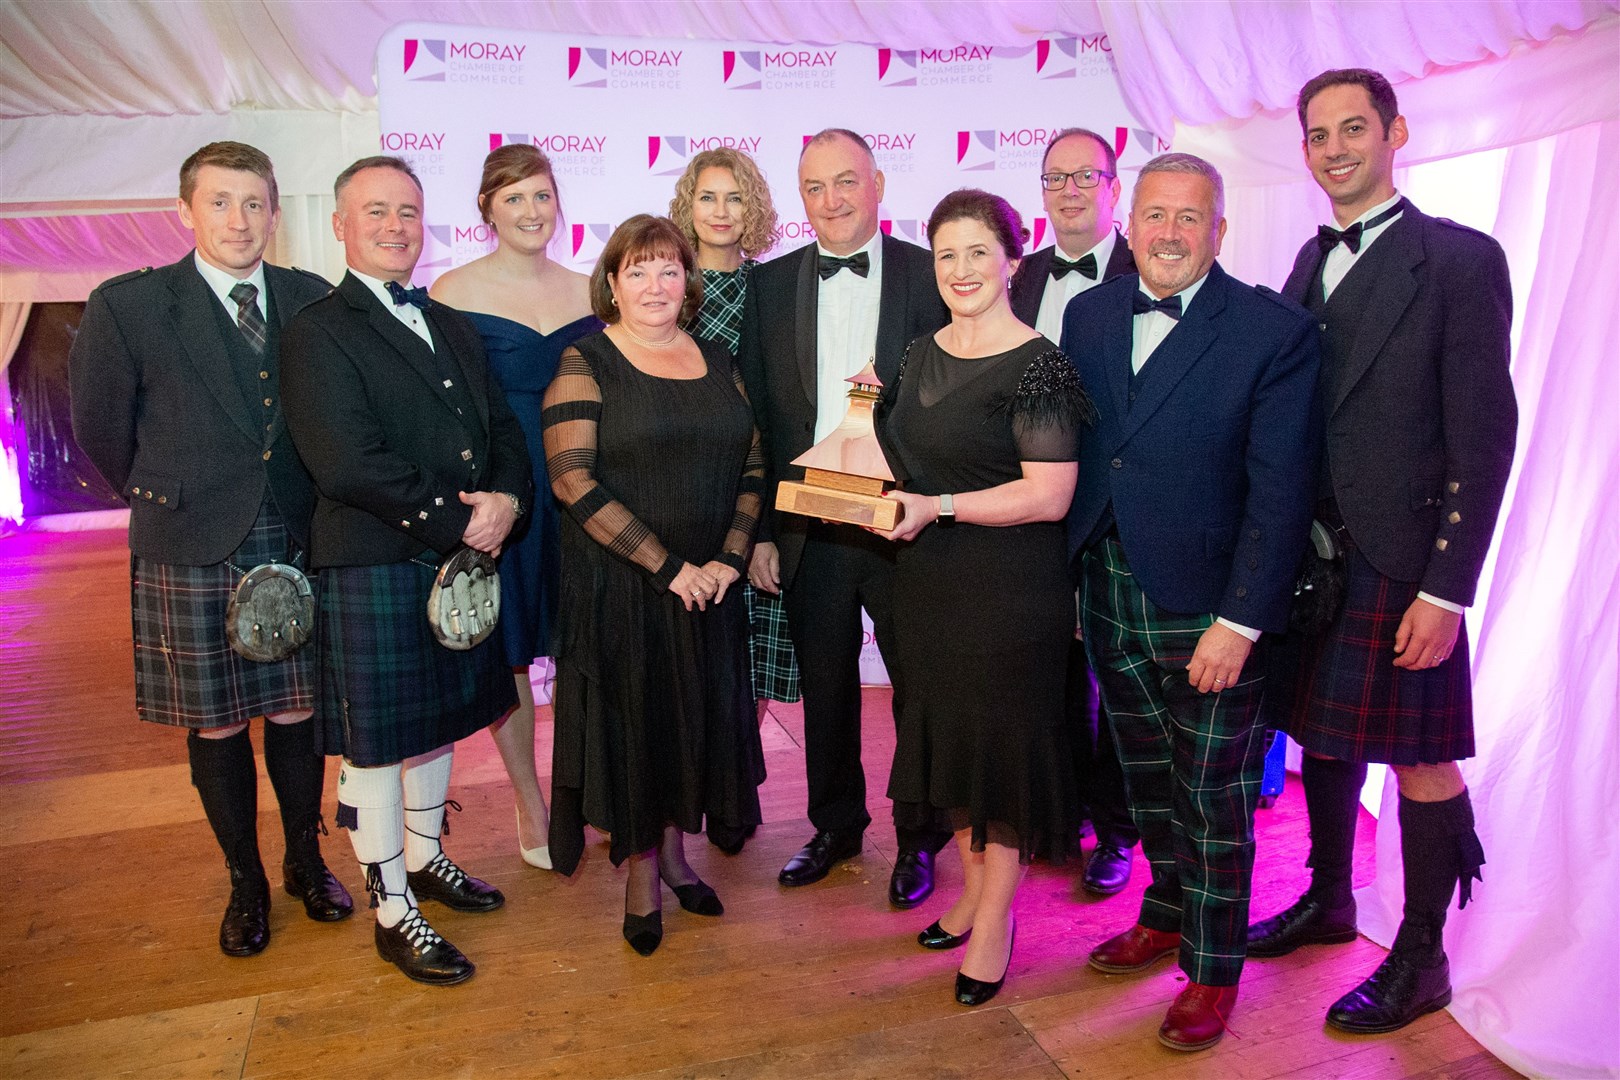 William Grant & Son were awarded the Business Award for the company's contribution to the Moray economy...Moray Chamber of Commerce 2019 Awards Evening - held at Gordon Castle, Fochabers - on Friday October 4...Picture: Daniel Forsyth. Image No.044691.